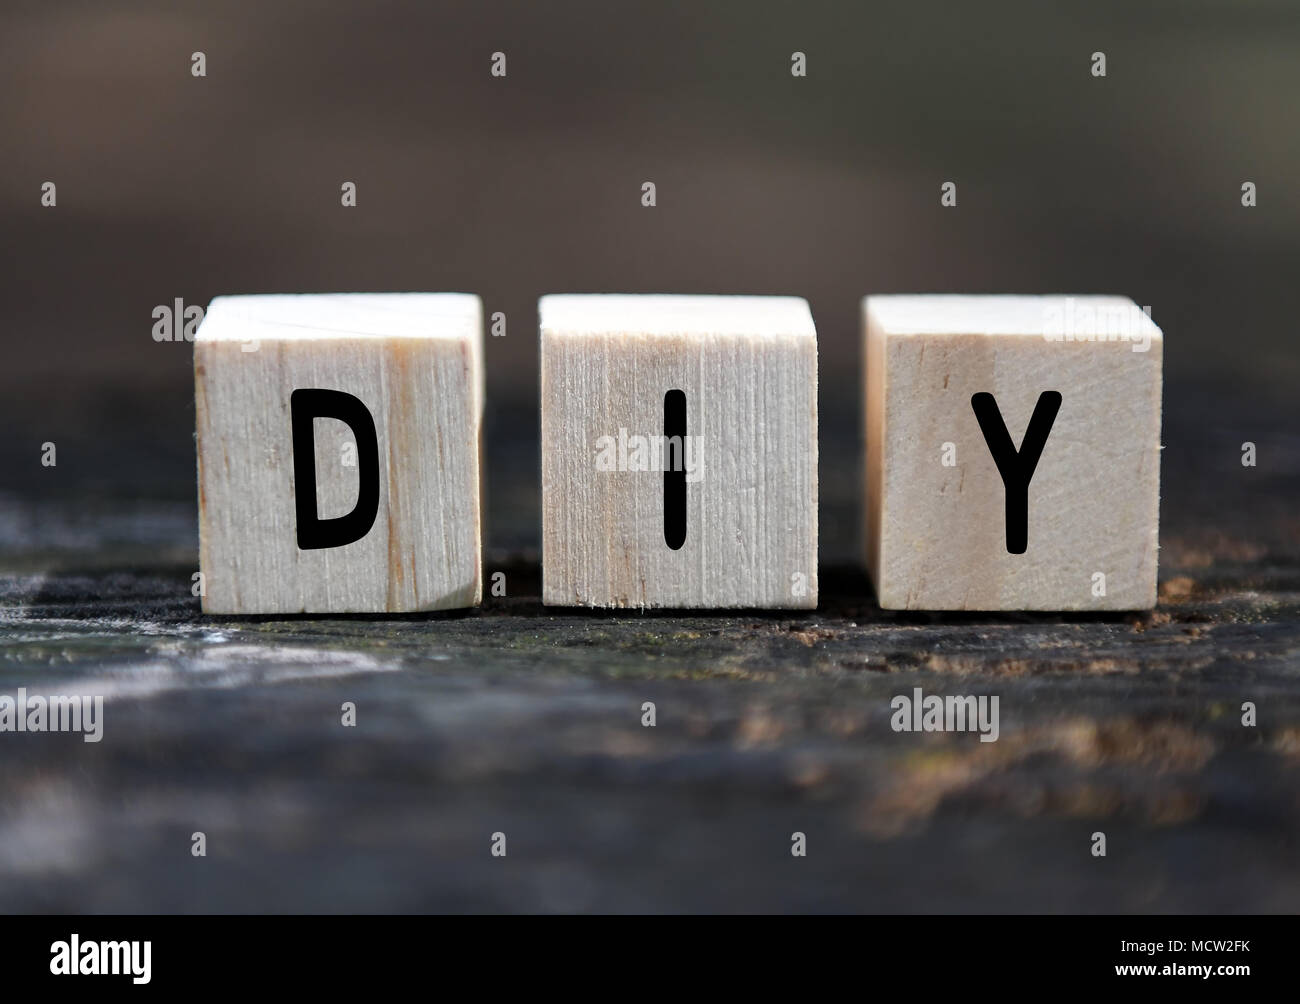 DIY word on wood blocks with blurry background Stock Photo